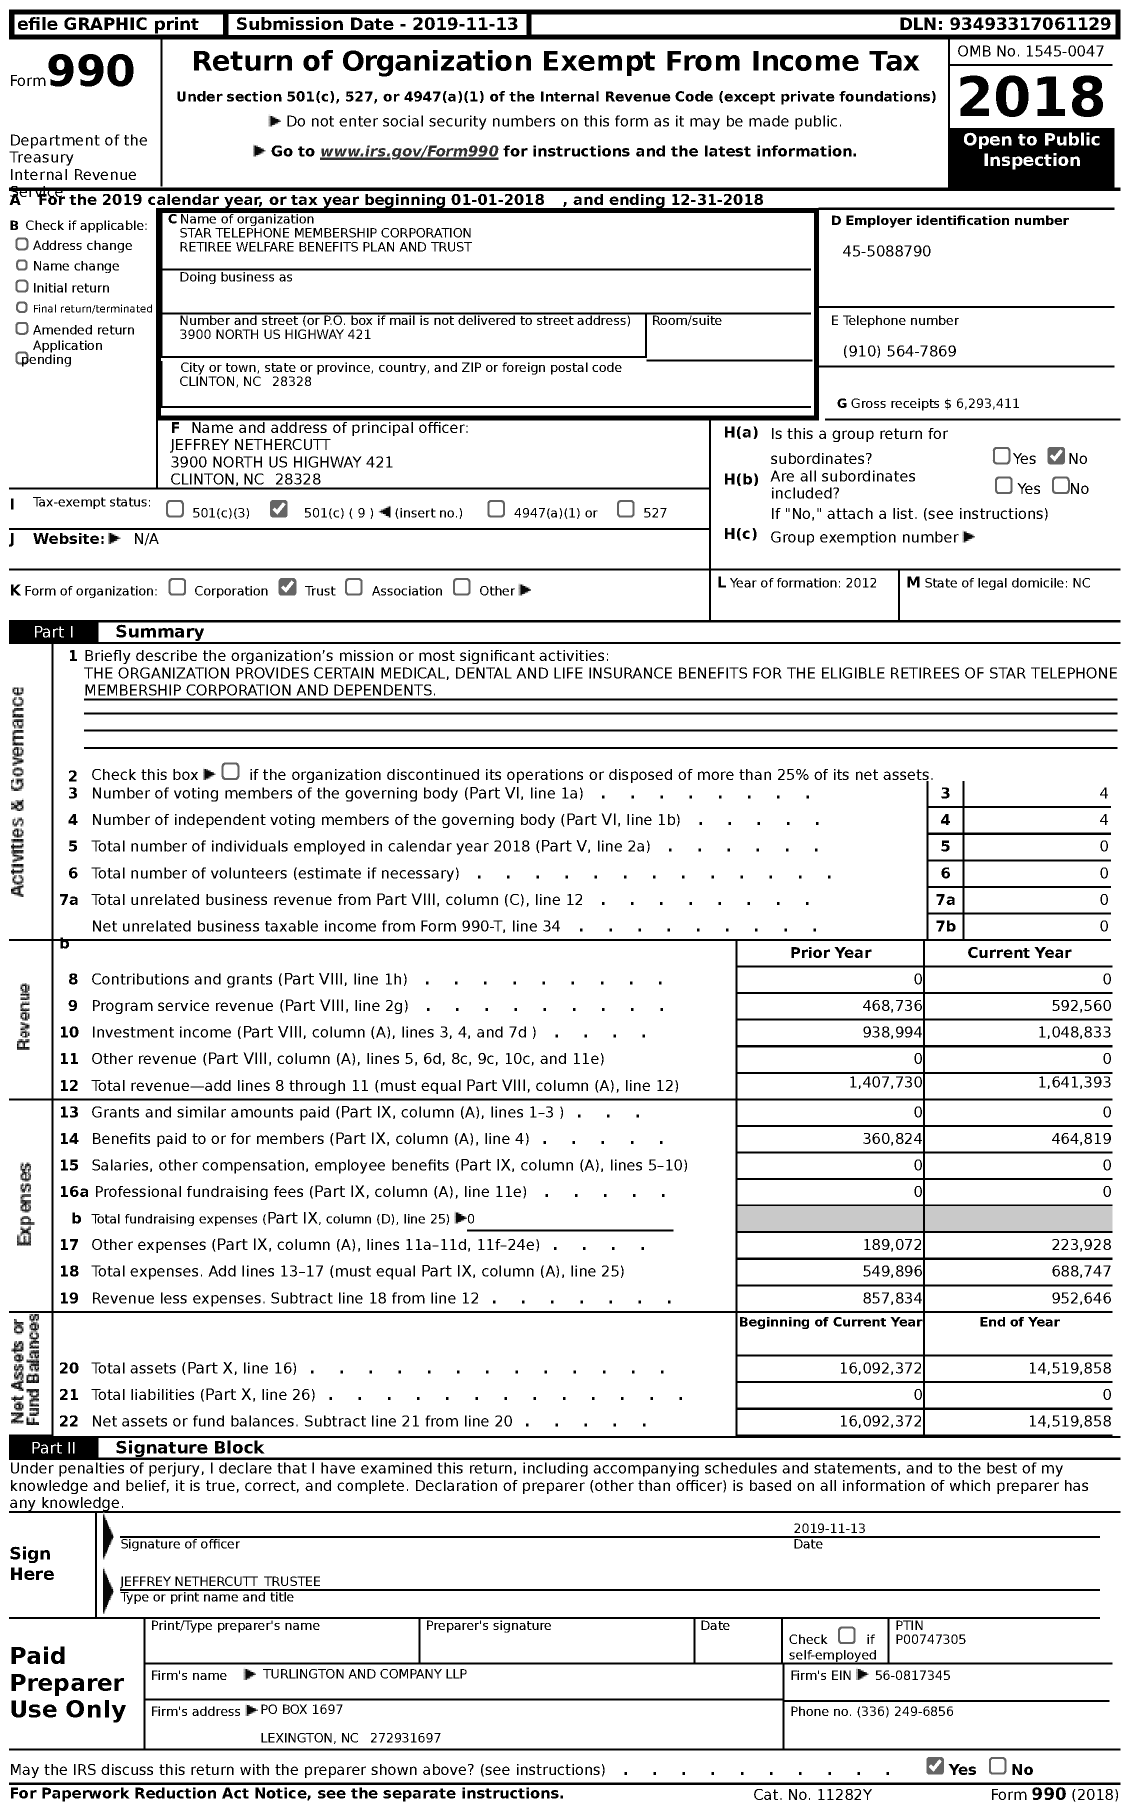 Image of first page of 2018 Form 990 for Star Telephone Membership Corporation Retiree Welfare Benefits Plan and Trust